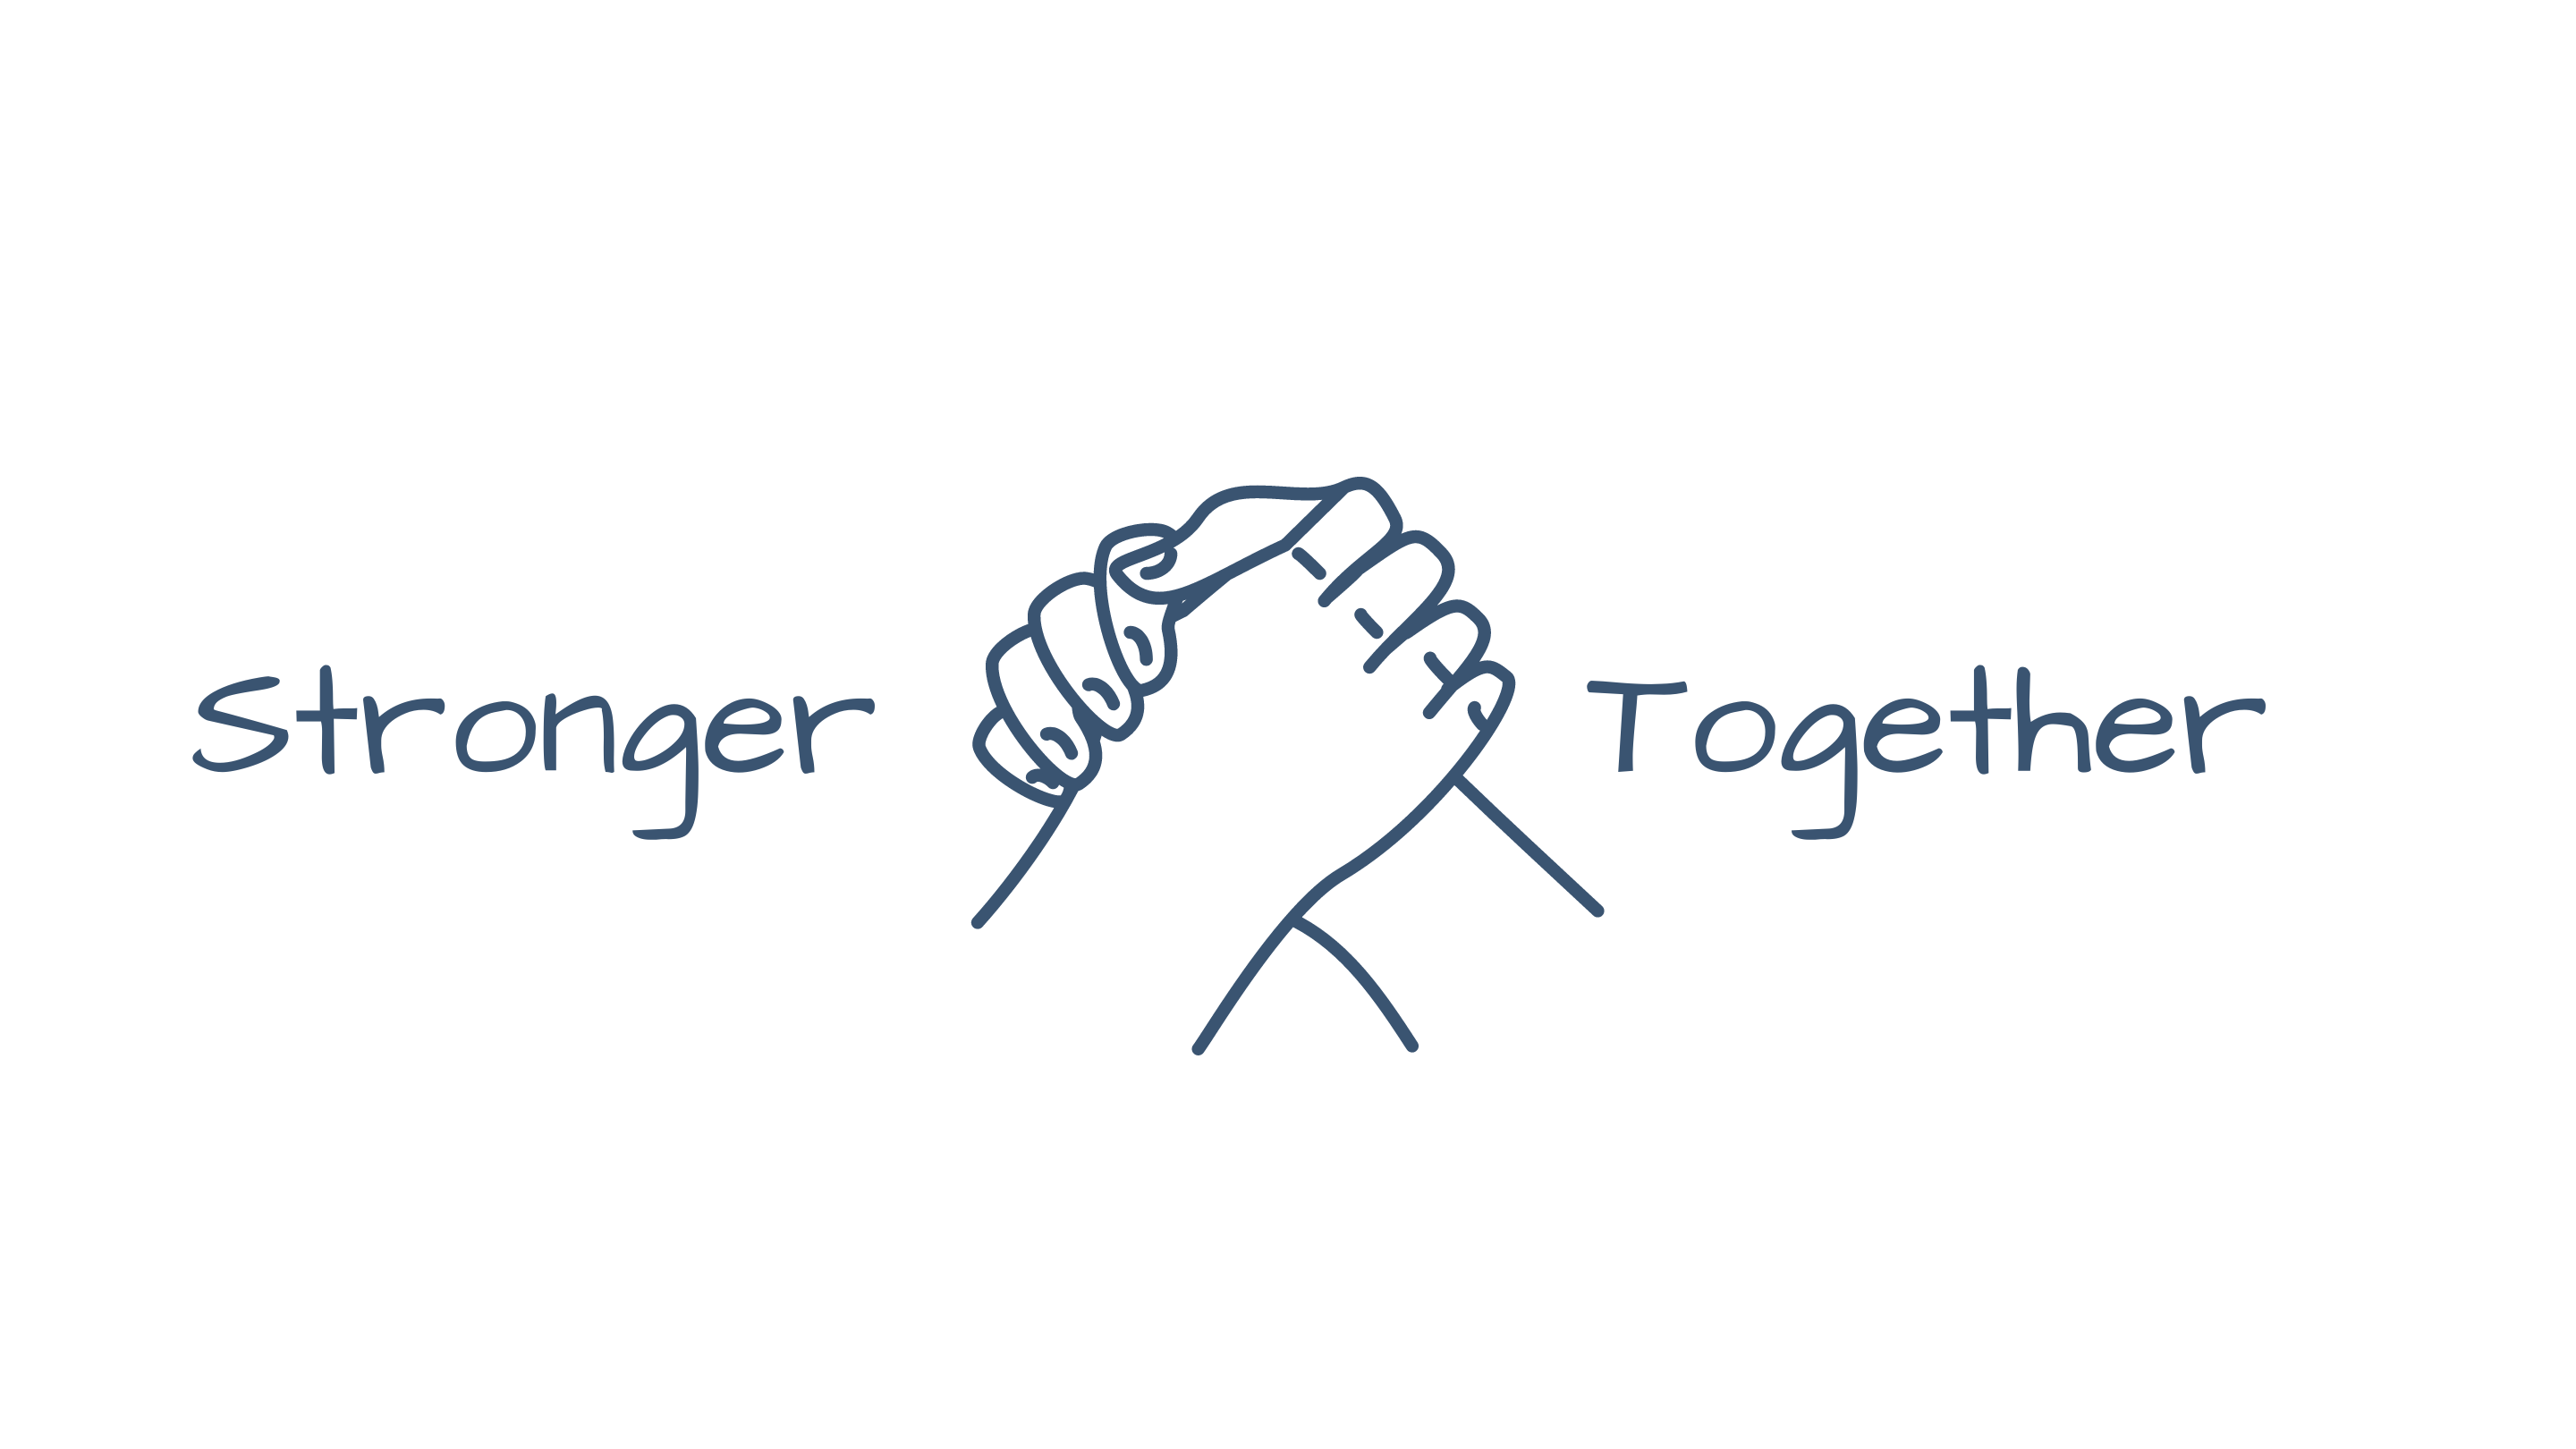 Camp Image: Two hands grasped together with the words 'Stronger Together' (the theme of camp)